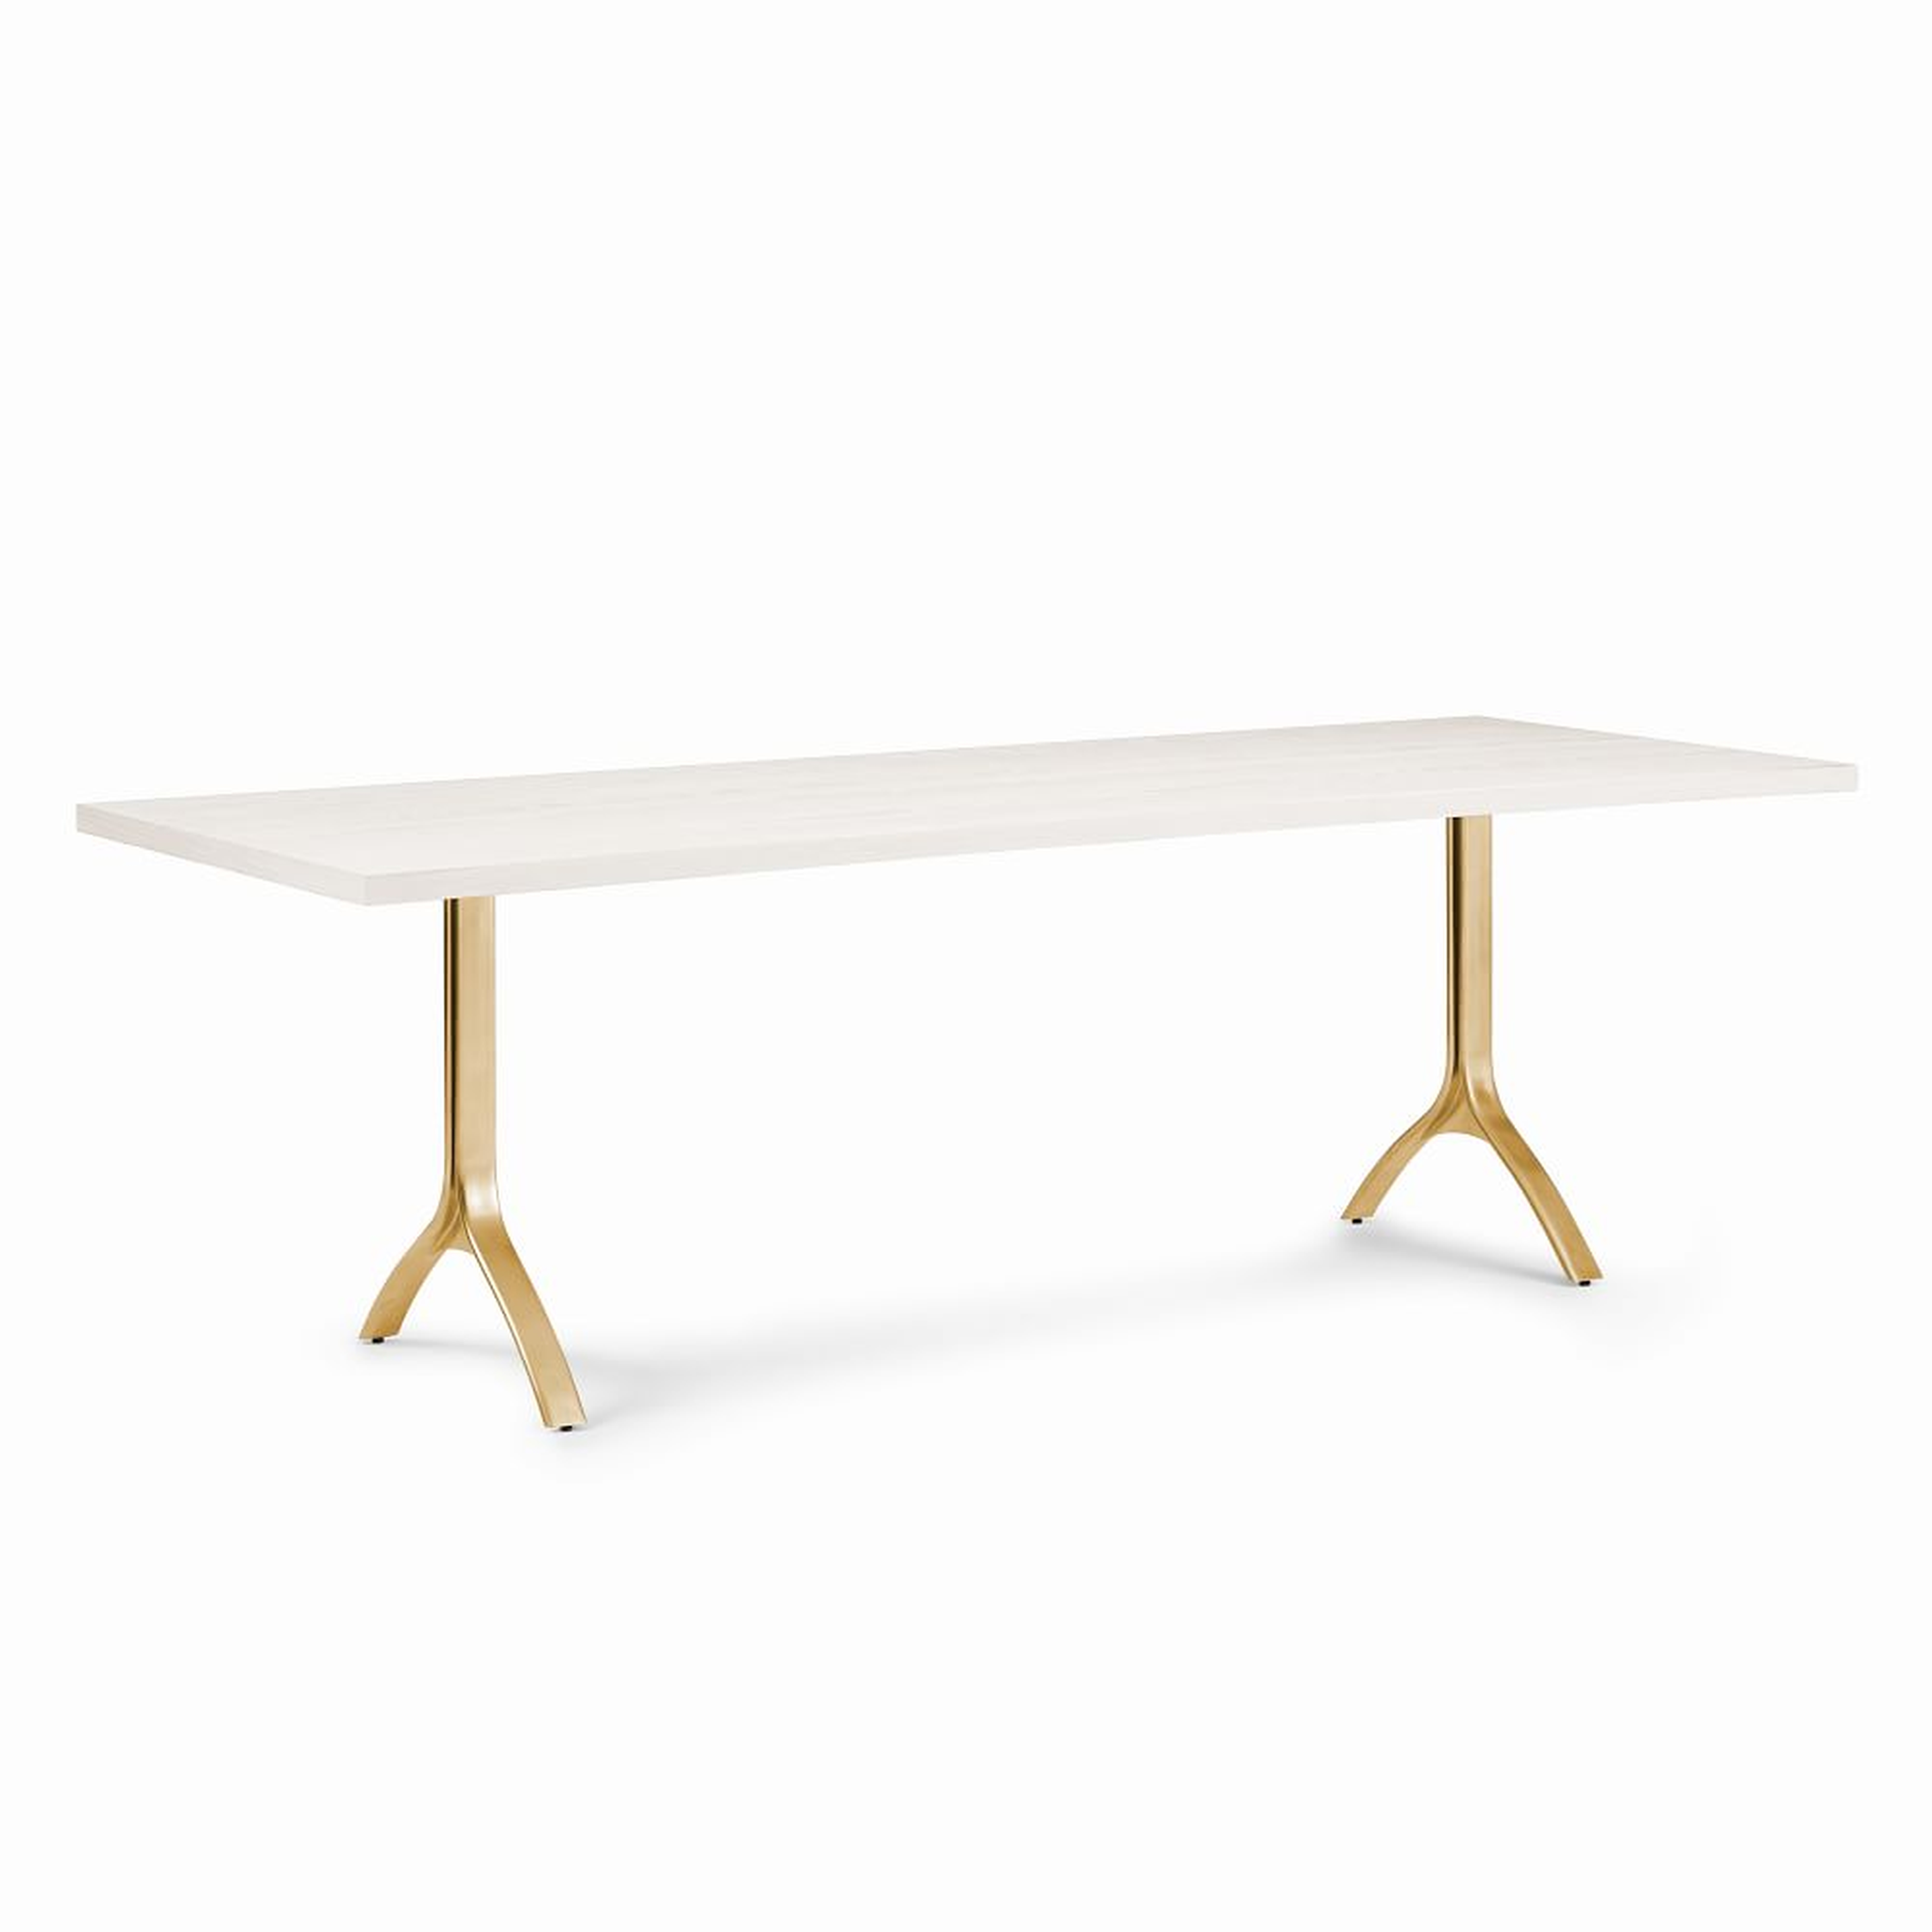 Avery Wishbone 94" Dining Table, Winter Wood, Antique Brass - West Elm